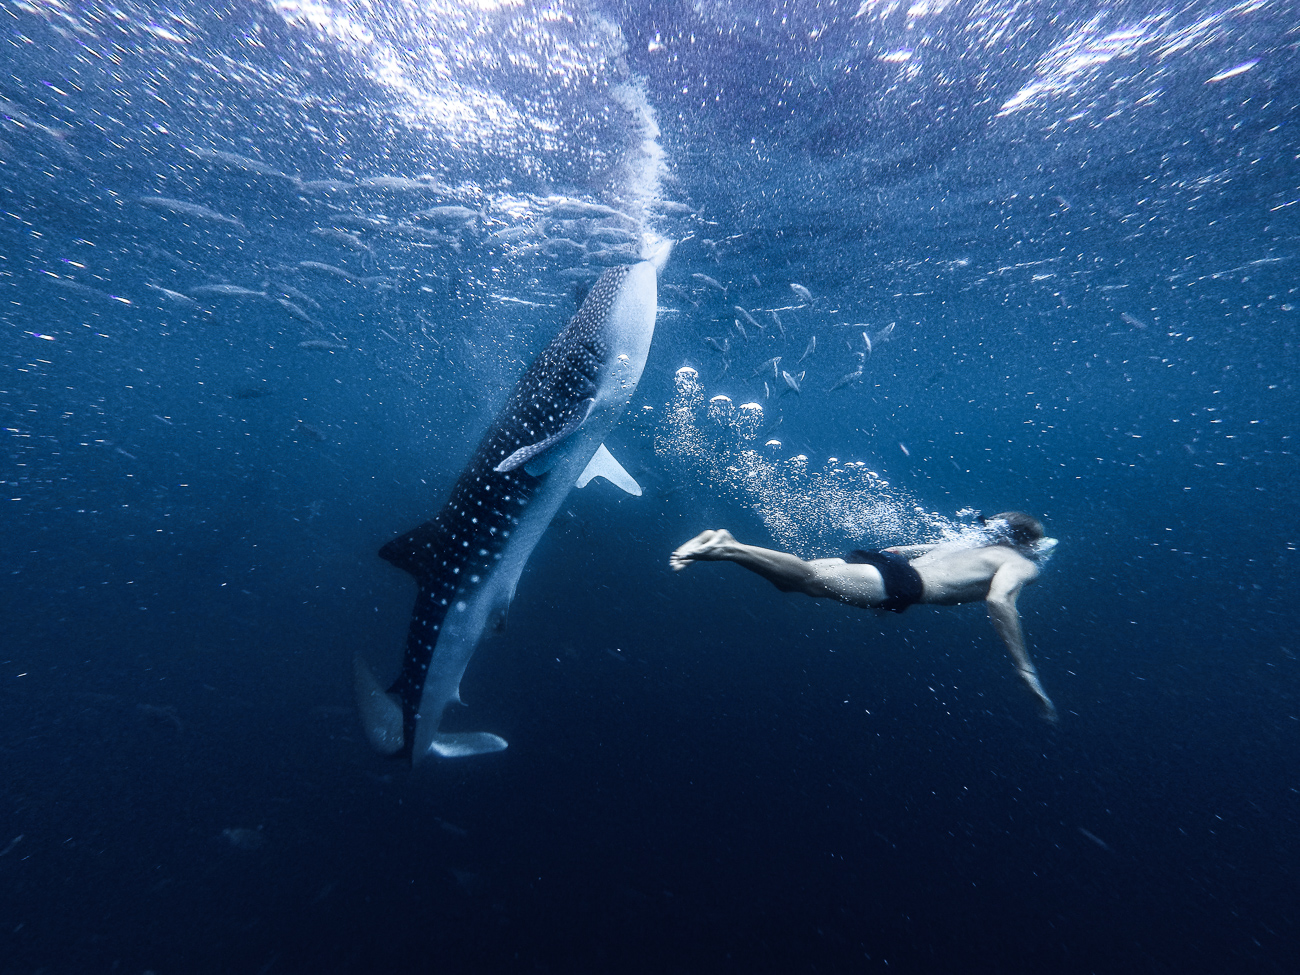 a man swimming next to a whale in the ocean.